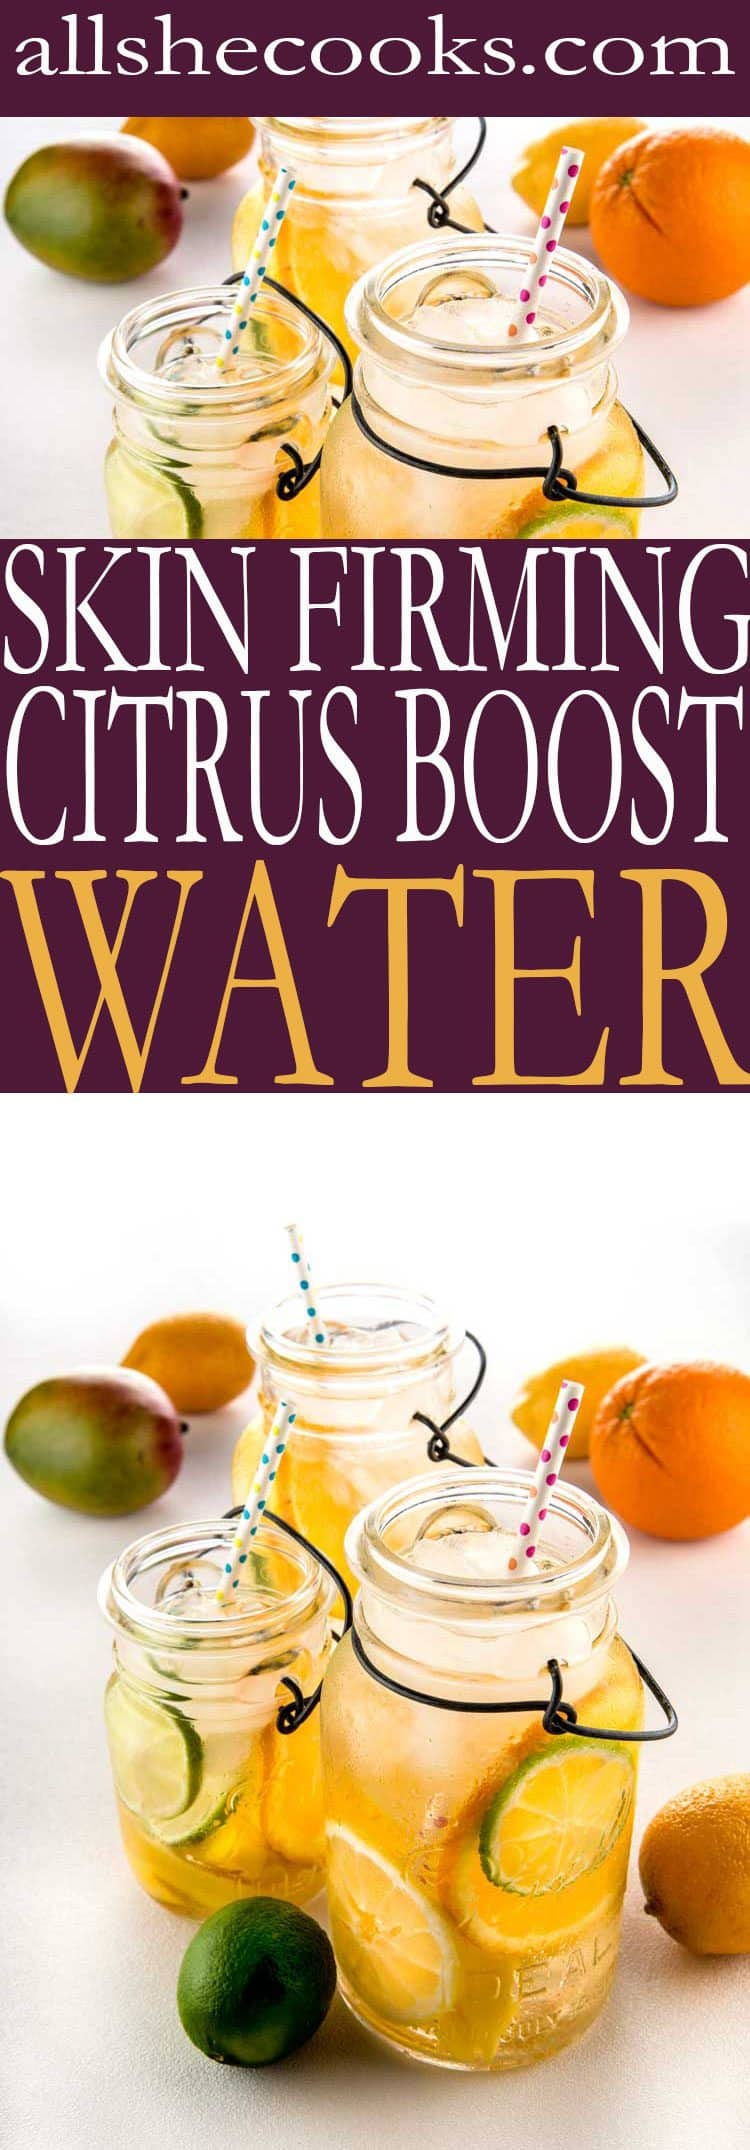 Citrus-infused boost water has abundant health and beauty benefits. It keeps your metabolism cranking and it helps naturally smooth and tighten skin.best infused water recipes 